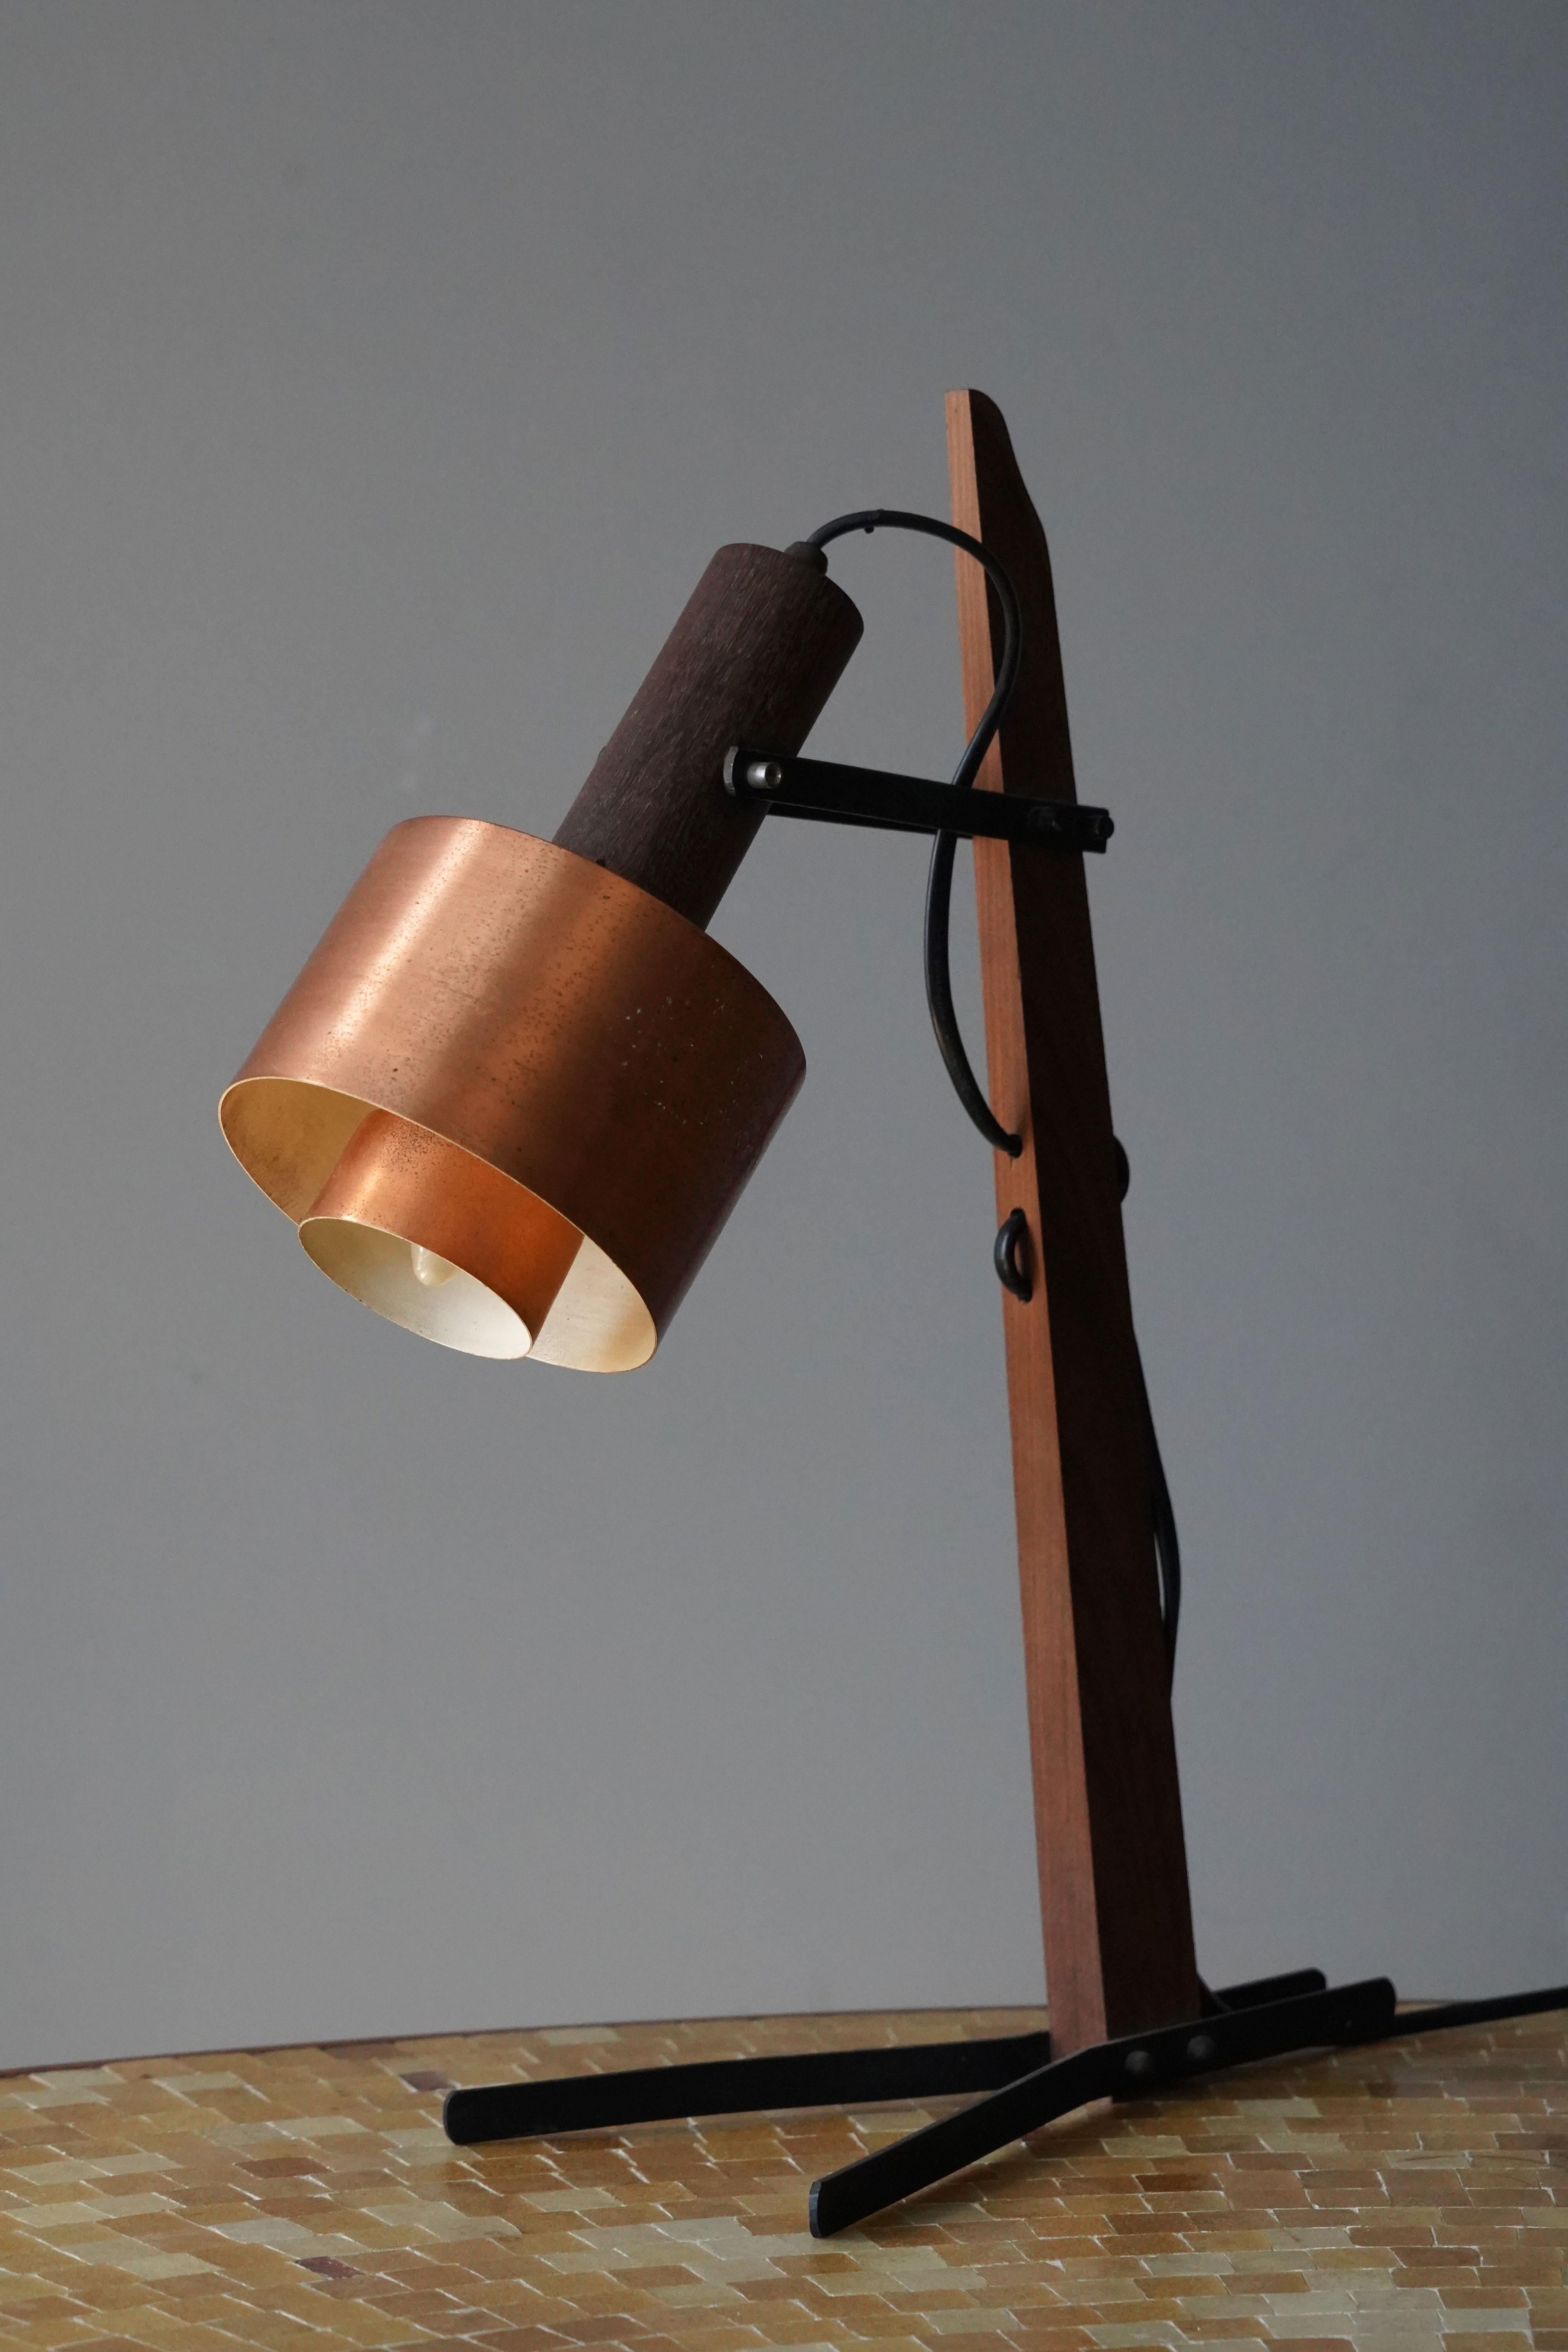 An adjustable table lamp. In wood, metal, and copper.

Sourced in Italy. 

Other designer of the period include Gio Ponti, Franco Albini, Angelo Lelii, and Max Ingrand.